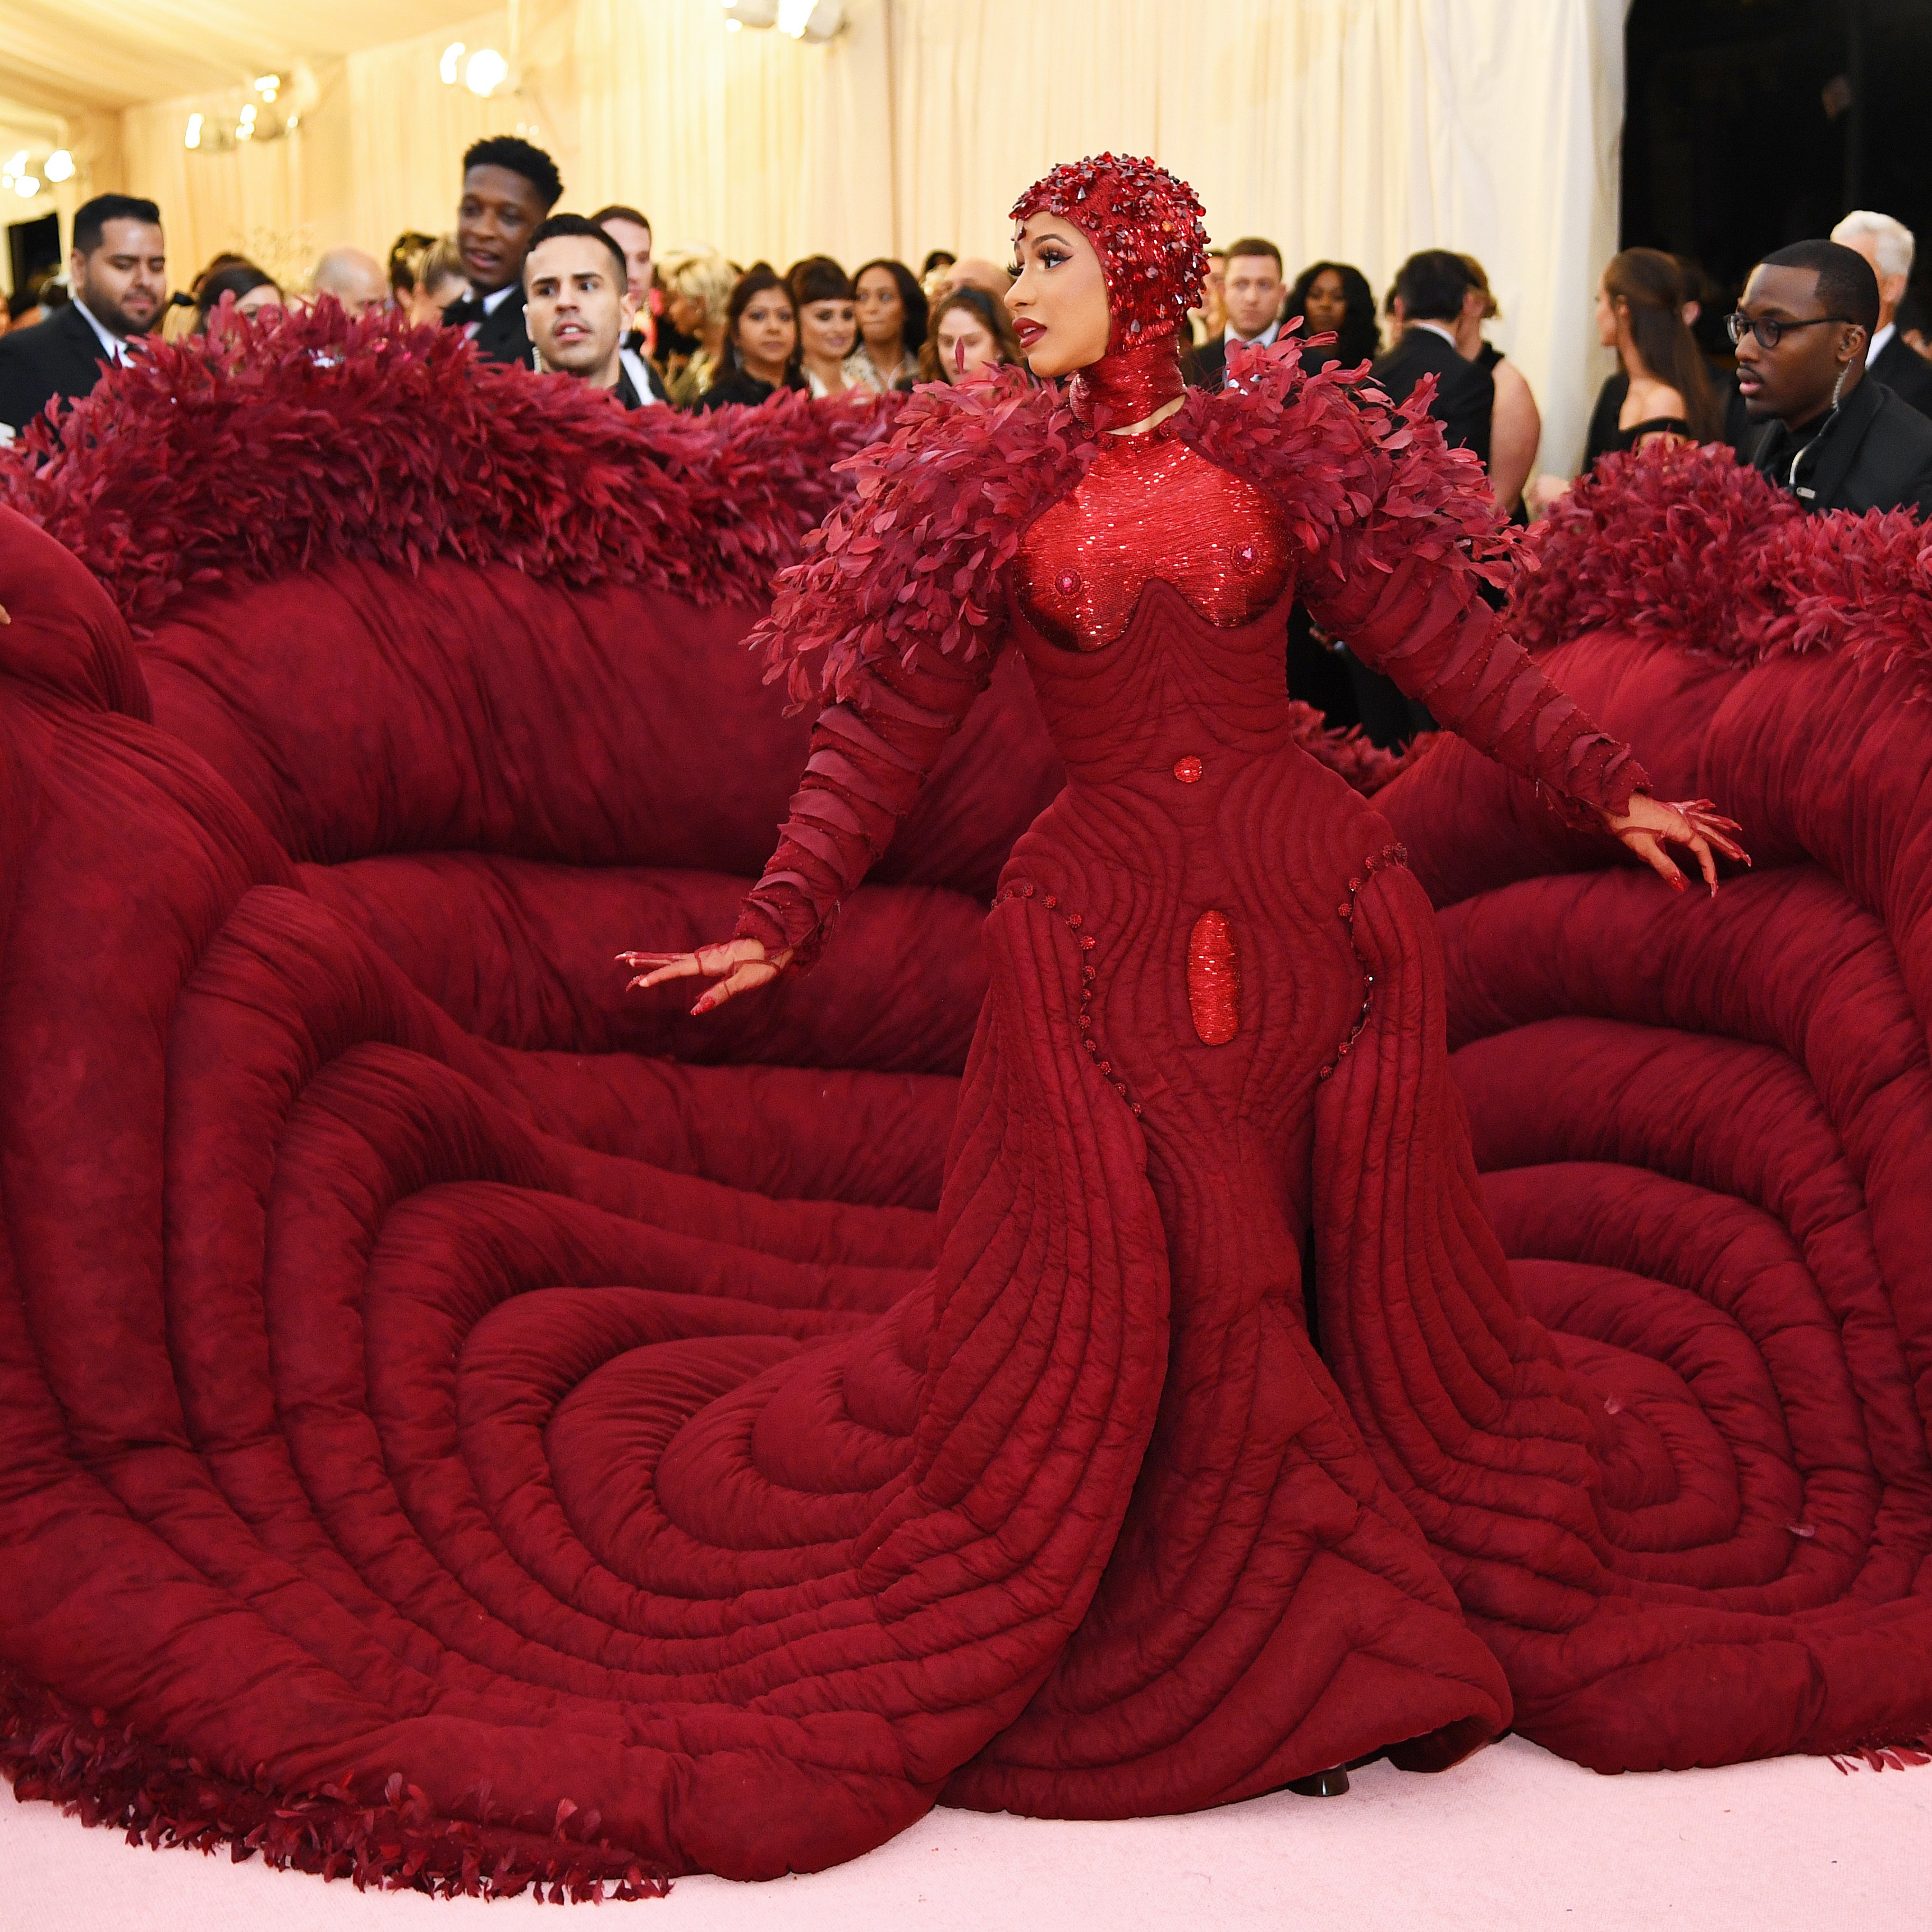 Cardi B Menstruation Gown Steals The Show At The Met Gala 2019